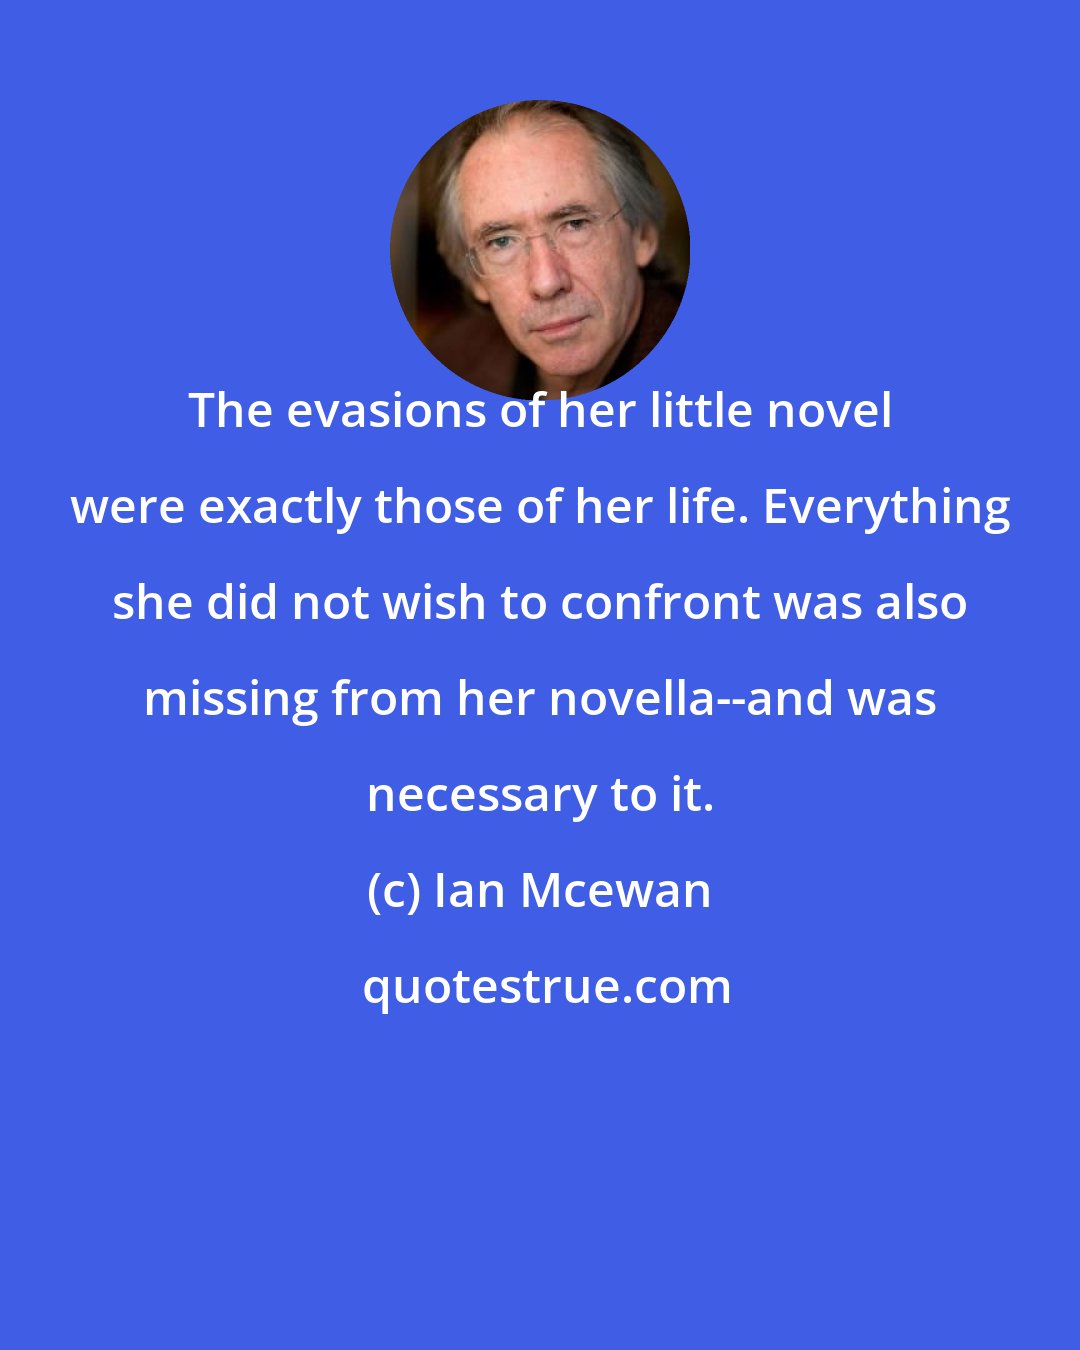 Ian Mcewan: The evasions of her little novel were exactly those of her life. Everything she did not wish to confront was also missing from her novella--and was necessary to it.